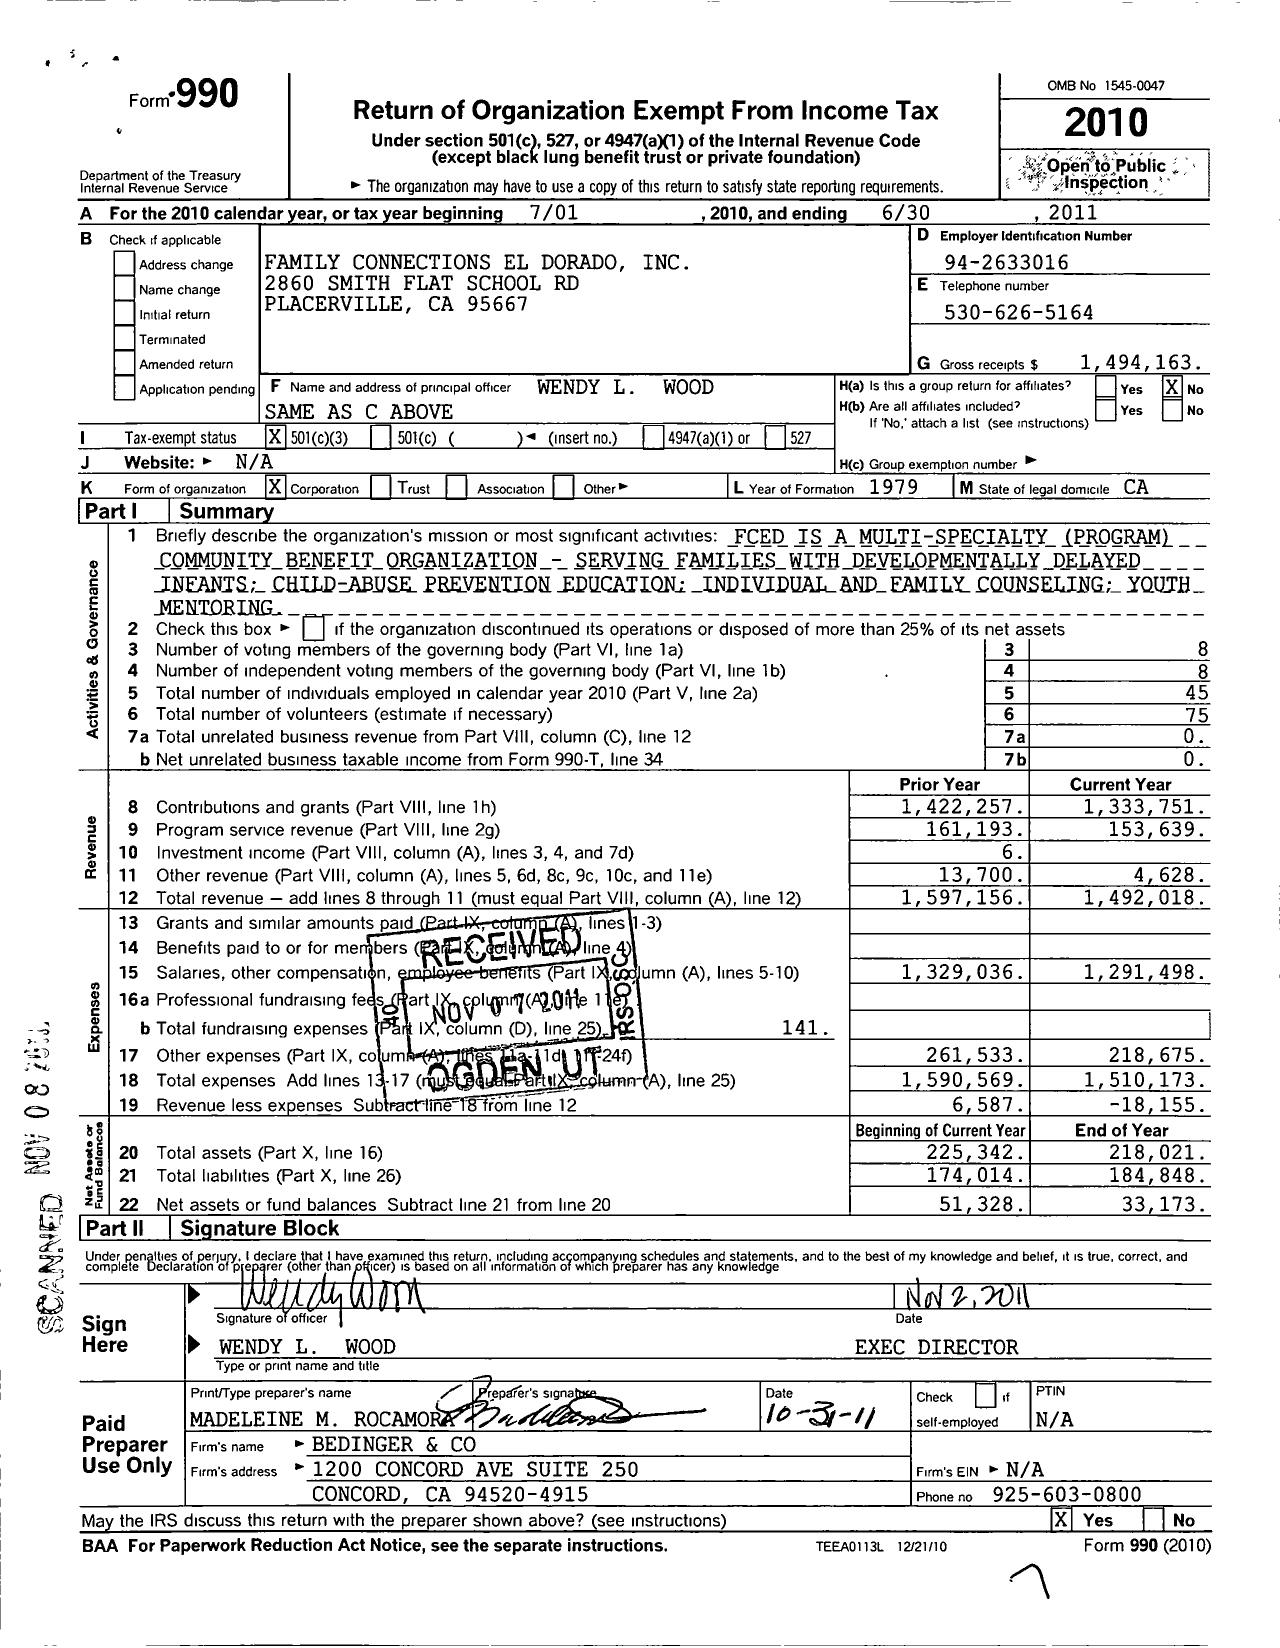 Image of first page of 2010 Form 990 for Family Connections El Dorado (FCED)